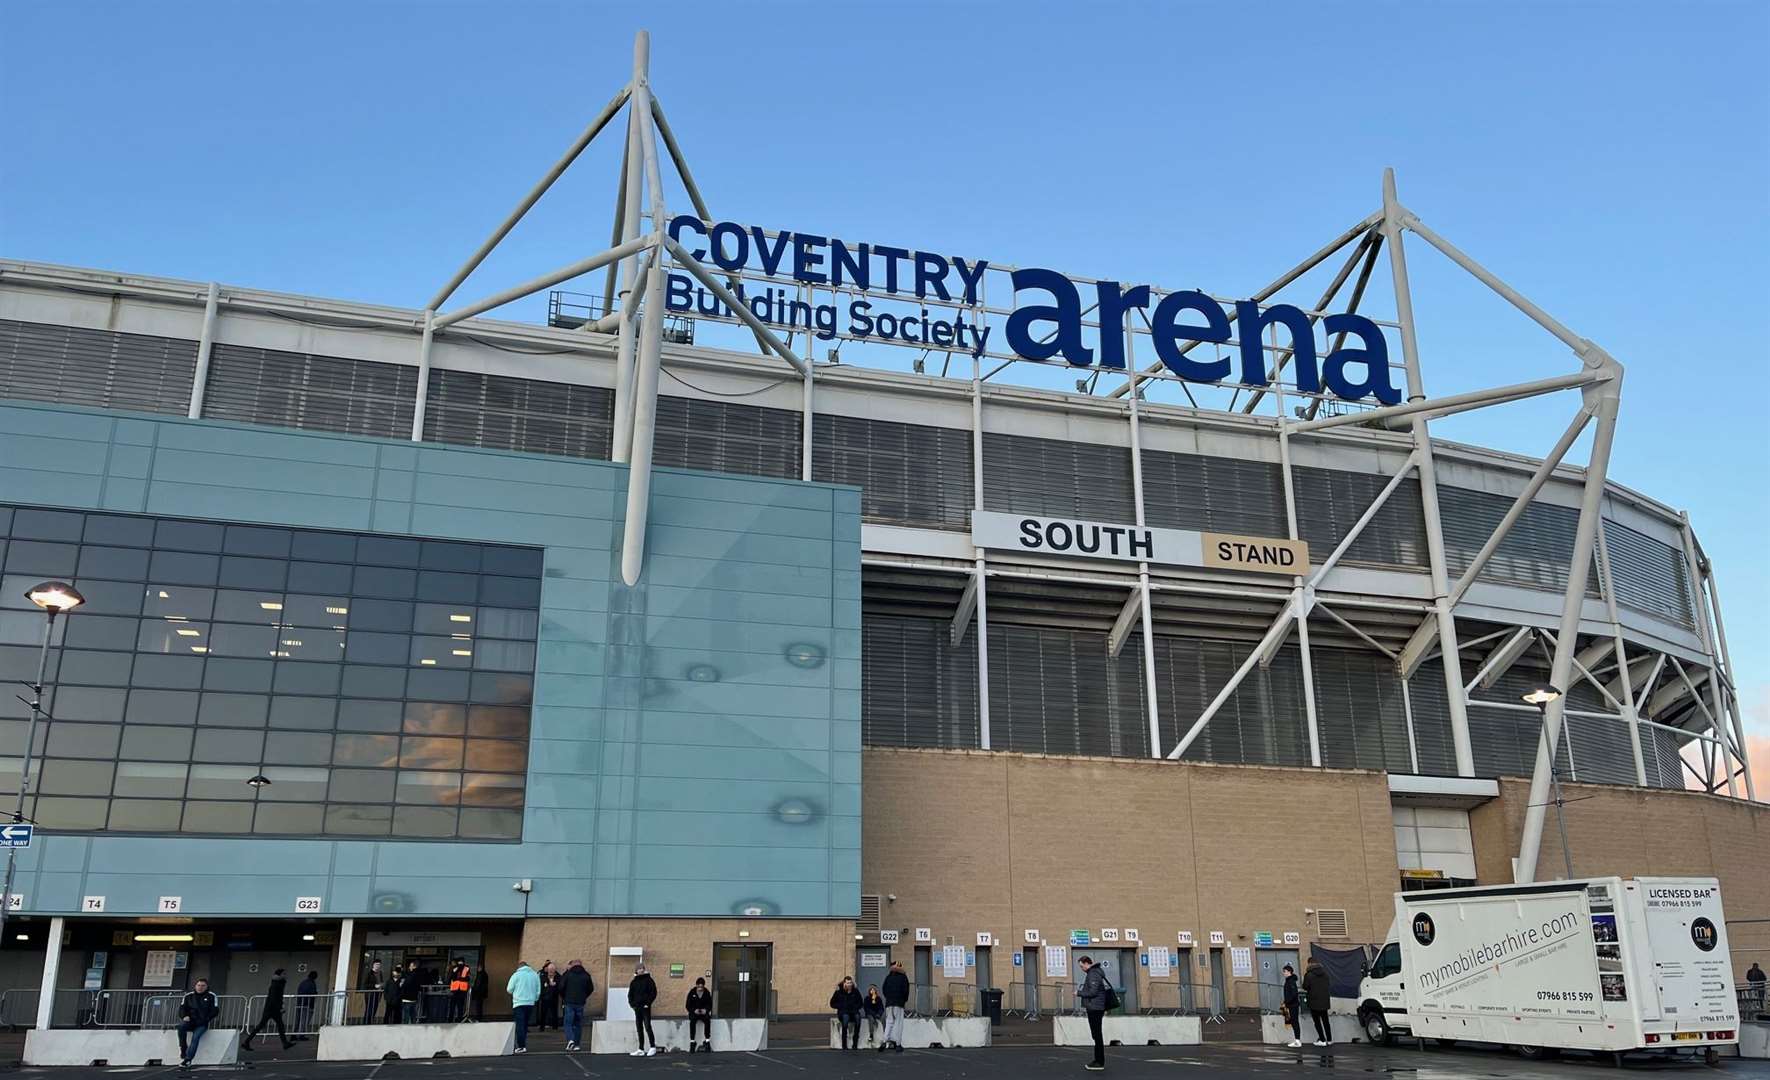 Maidstone will be playing Coventry at the CBS Arena this evening.